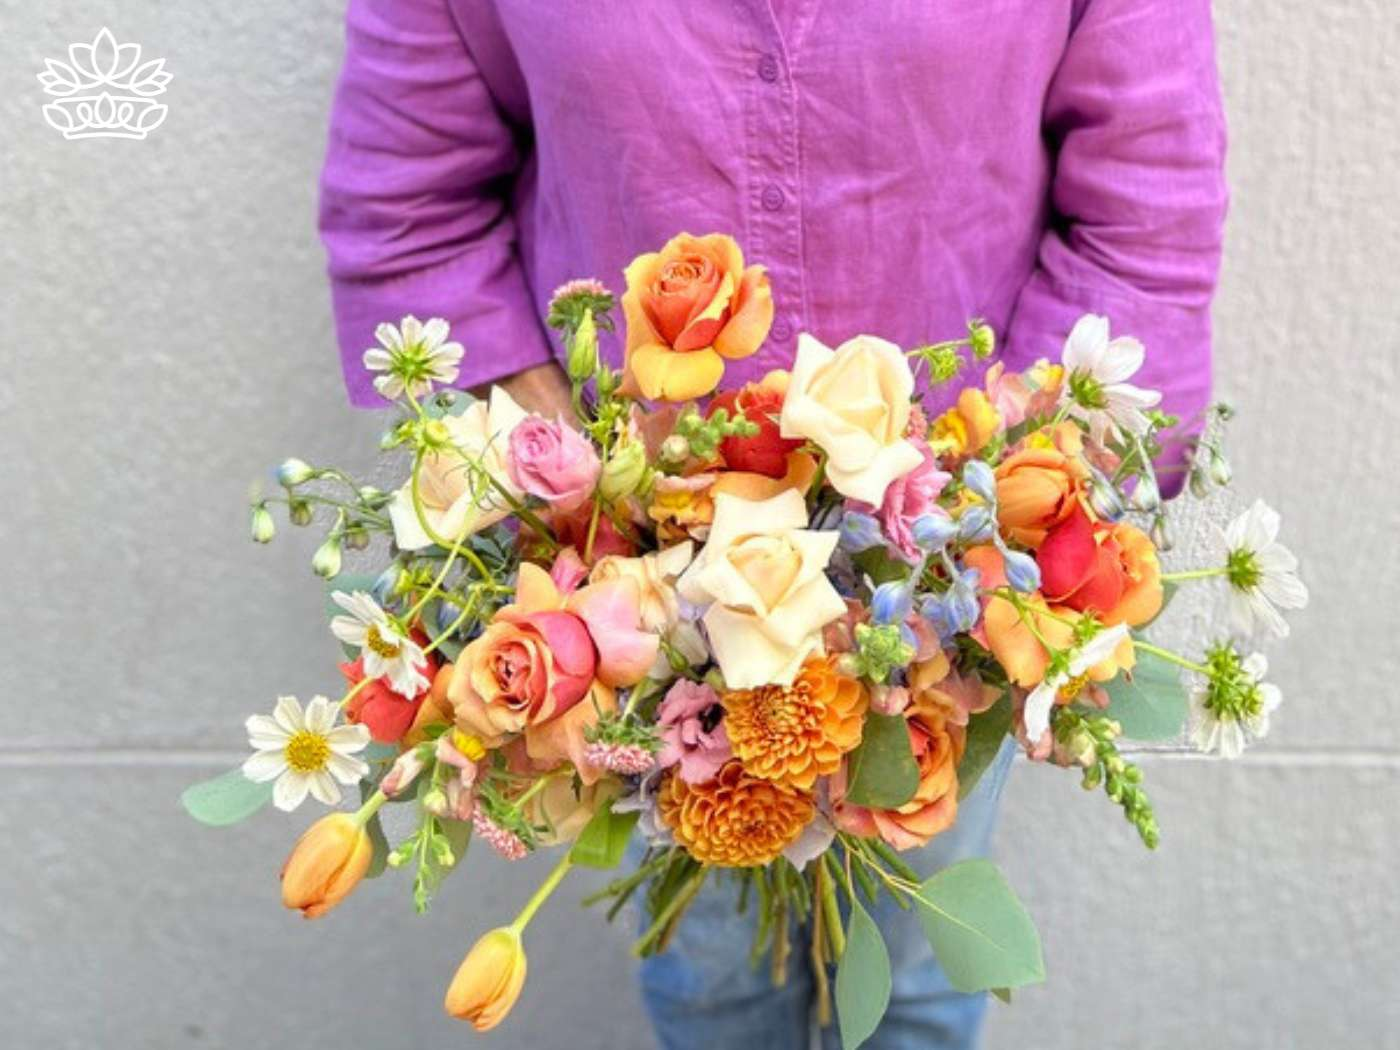 Person in a purple shirt holding a vibrant bouquet from the Easter Flowers Collection, symbolizing the joy of the Christian faith on Sunday morning, available for same day delivery by Fabulous Flowers and Gifts.